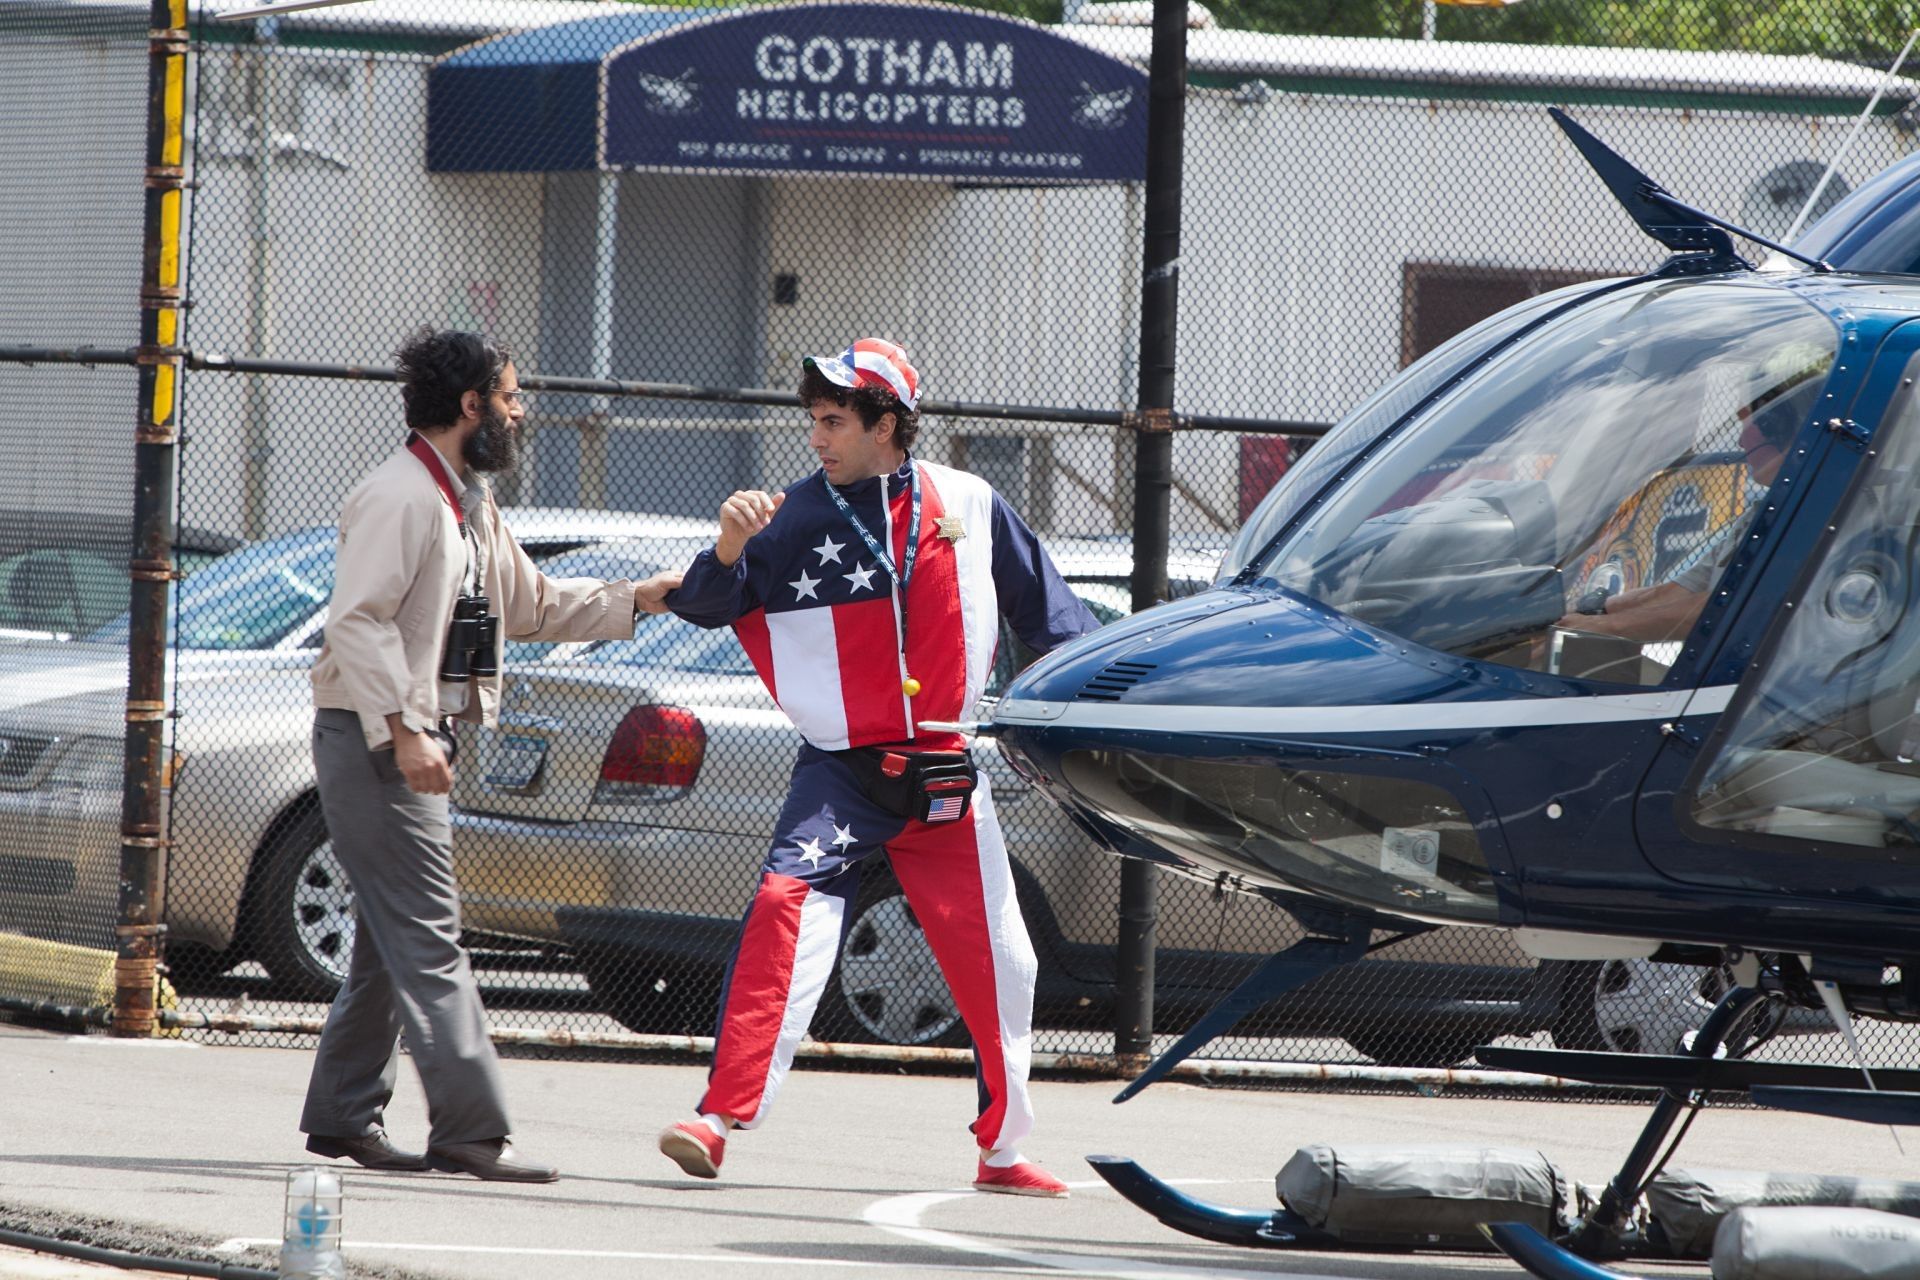 Jason Mantzoukas stars as Nadal and Sacha Baron Cohen stars as General Aladeen in Paramount Pictures' The Dictator (2012). Photo credit by Melinda Sue Gordon.